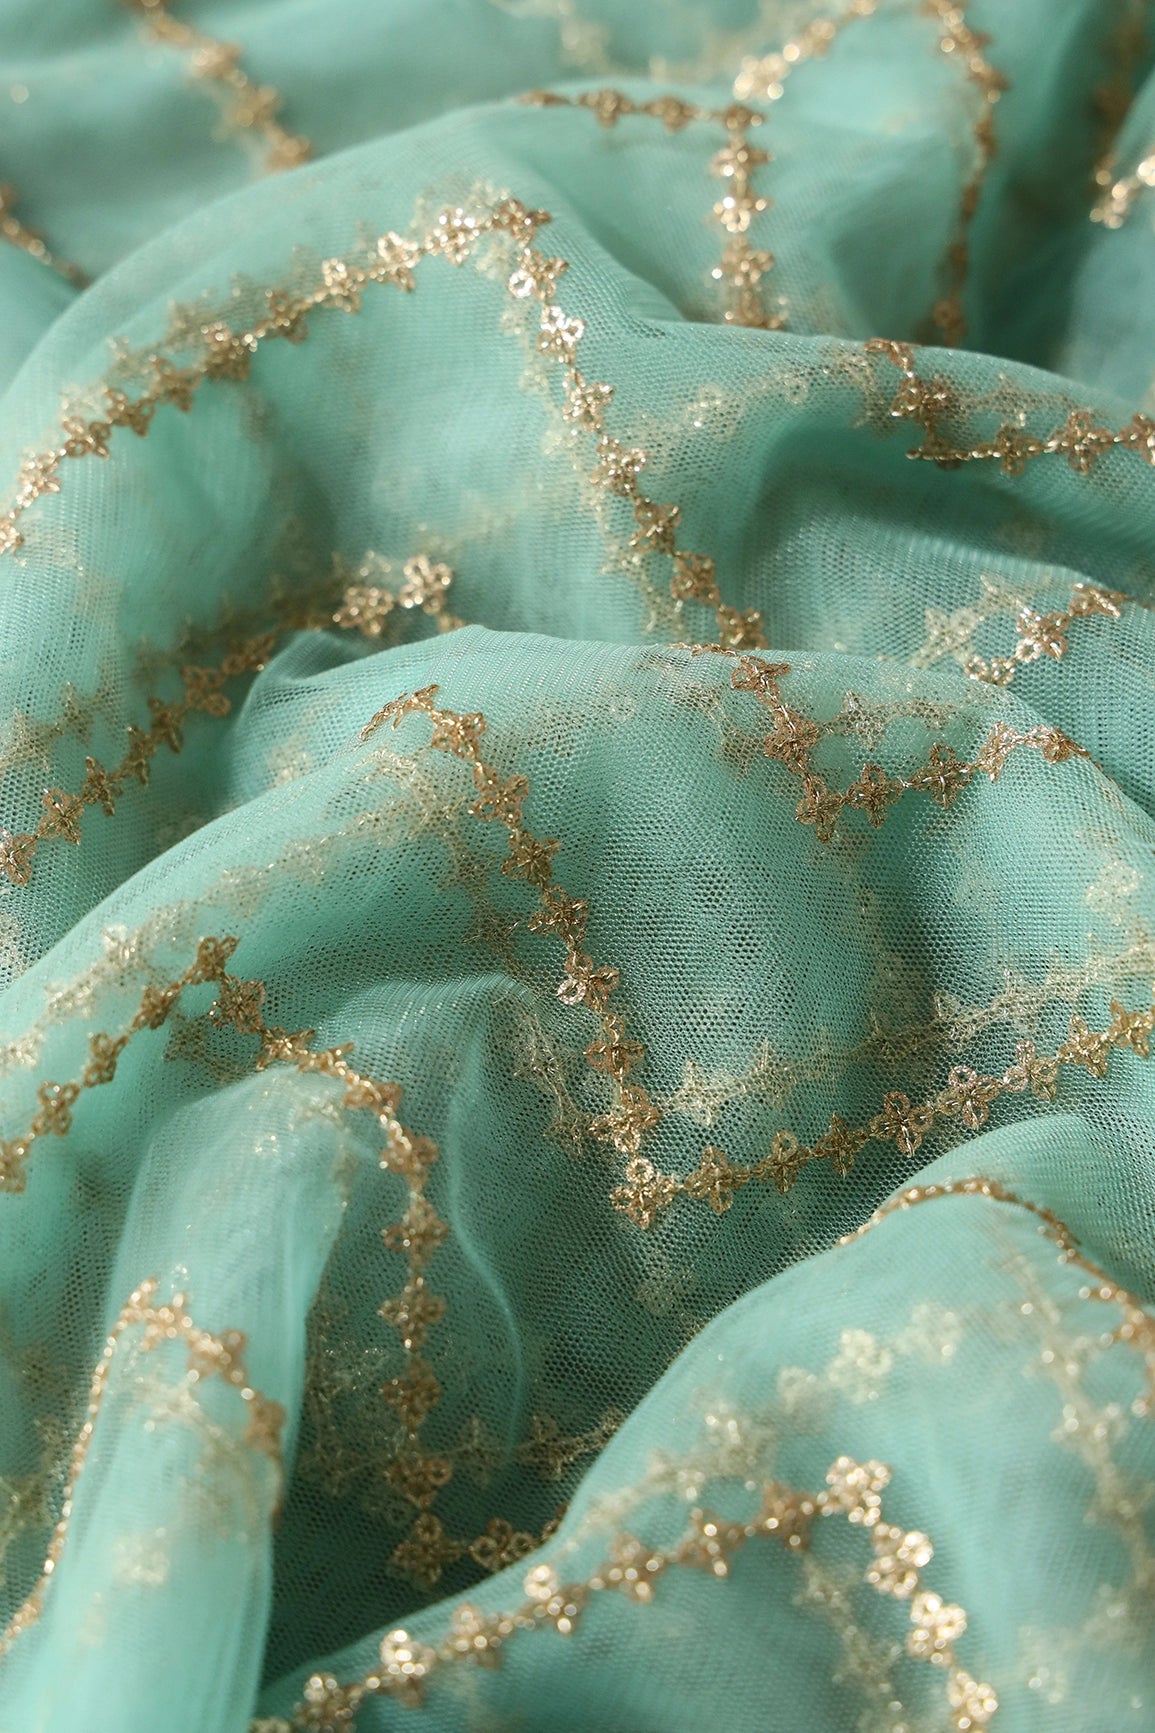 2 Meter Cut Piece Of Gold Sequins Chevron Embroidery On Teal Soft Net Fabric